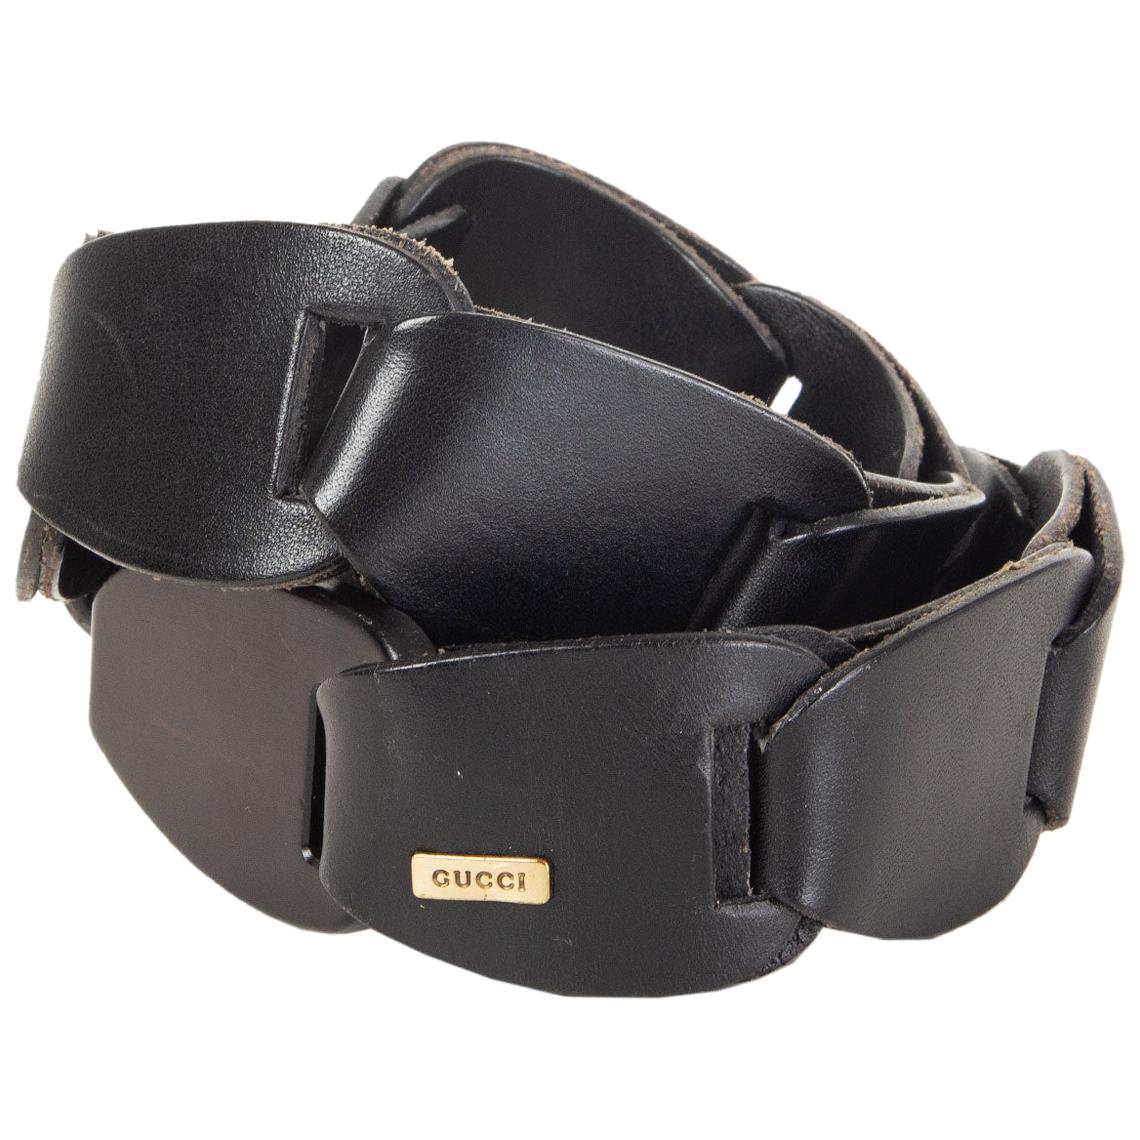 GUCCI black leather INTERTWINED Belt 80 / 32 For Sale